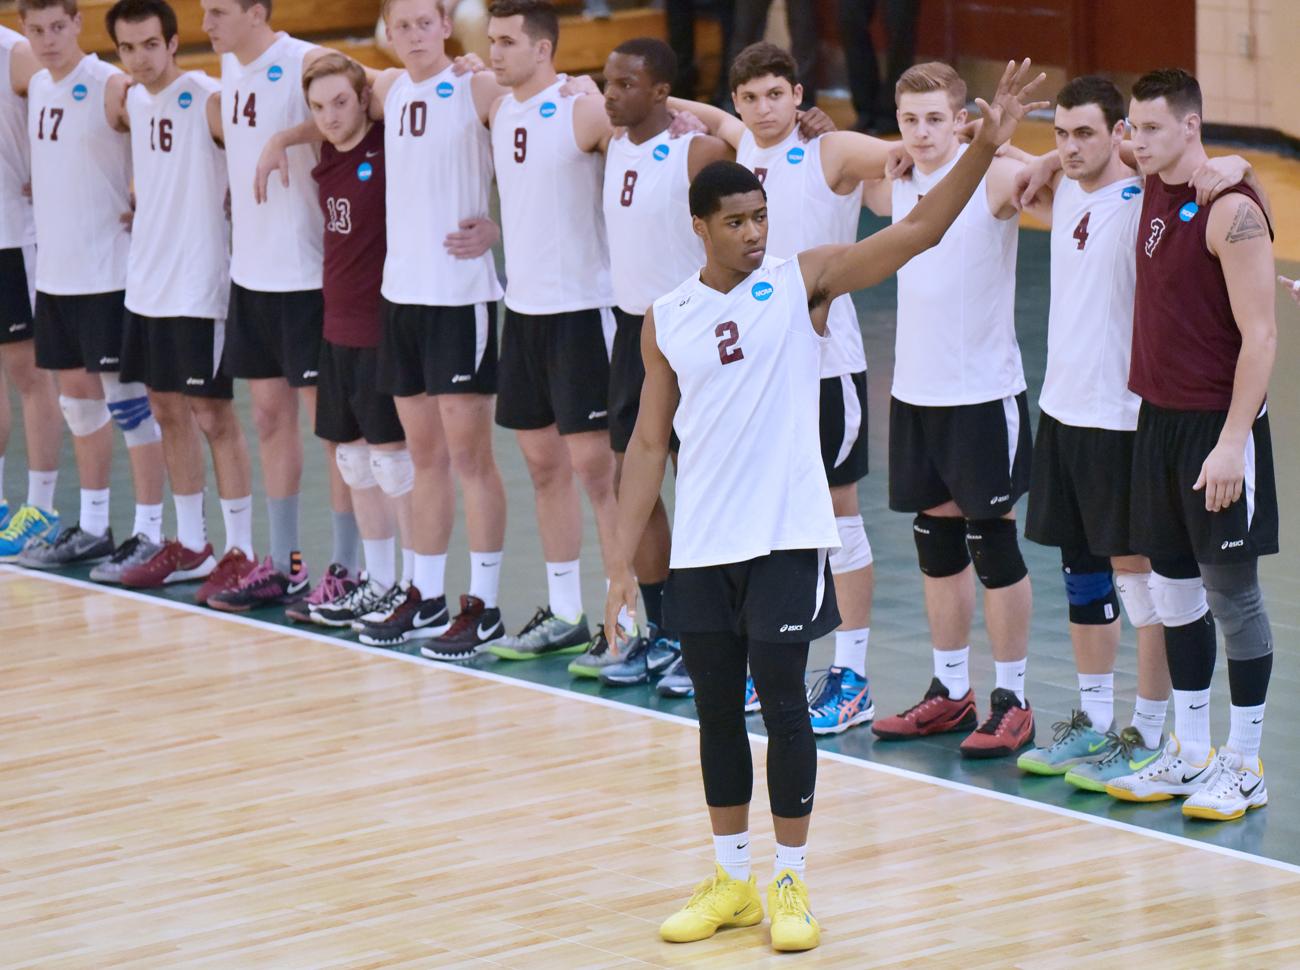 Greg Woods in his volleyball uniform standing on the court waving to the crowd, there are several of his teammates standing in a line behind him